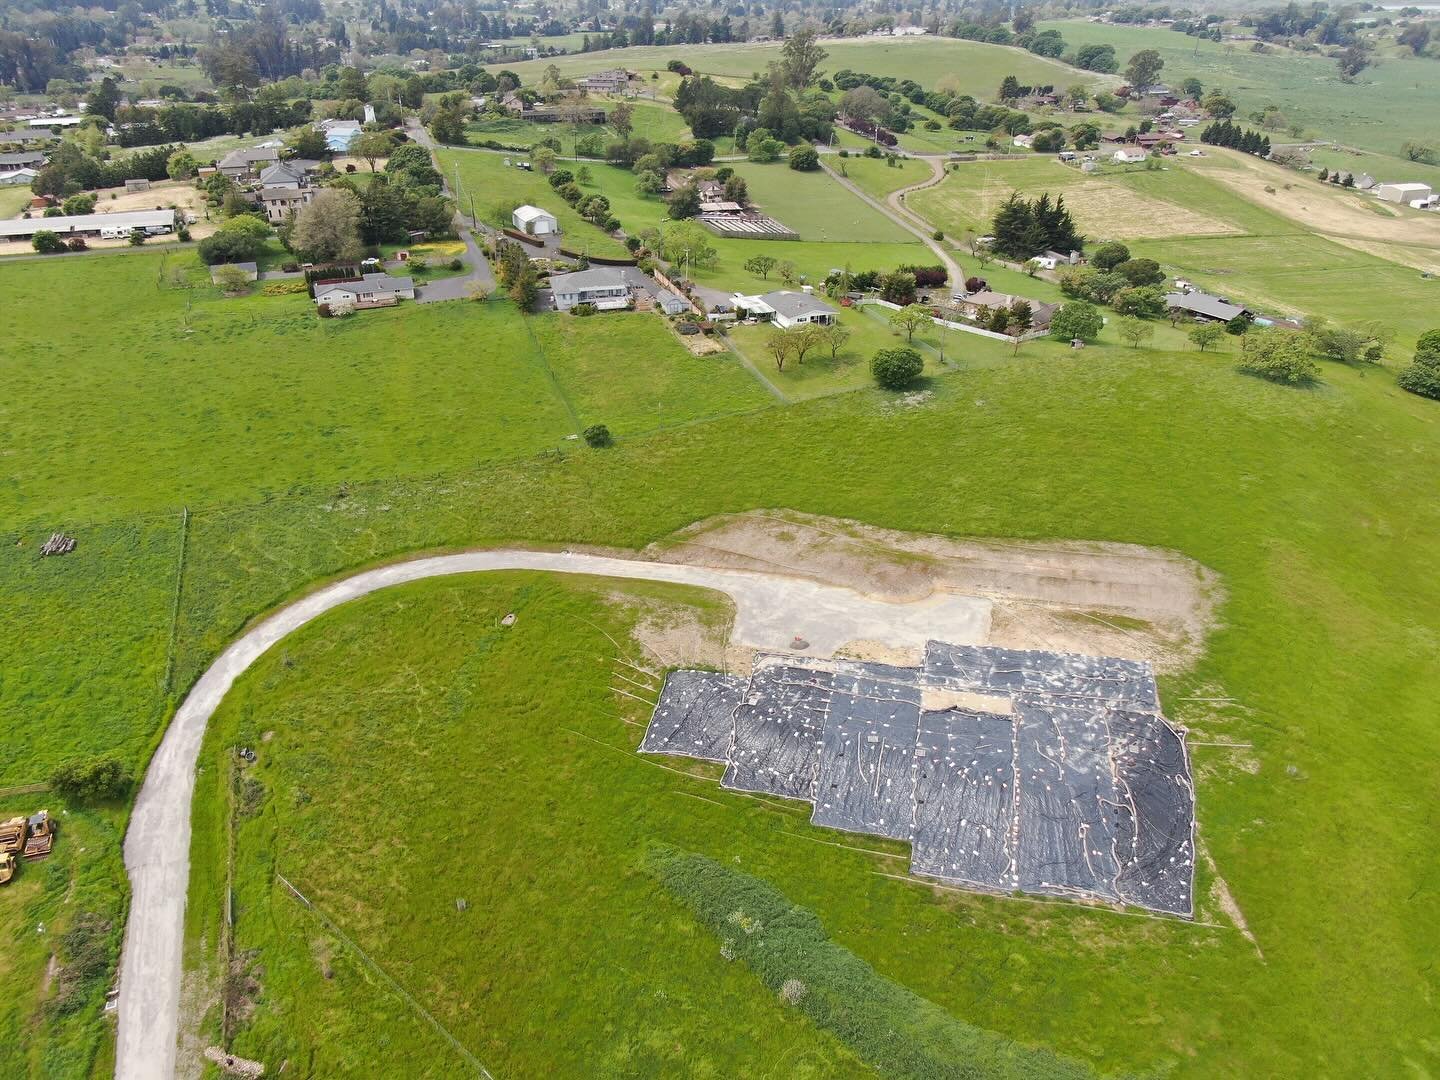 After (🤞🏻) a long winter I am looking forward to waking this site back up! We will be breaking ground on a great custom home in partnership with @danielstrening next week. Exciting times ahead! #customhomes #sonomacountycontractor #stonypoint